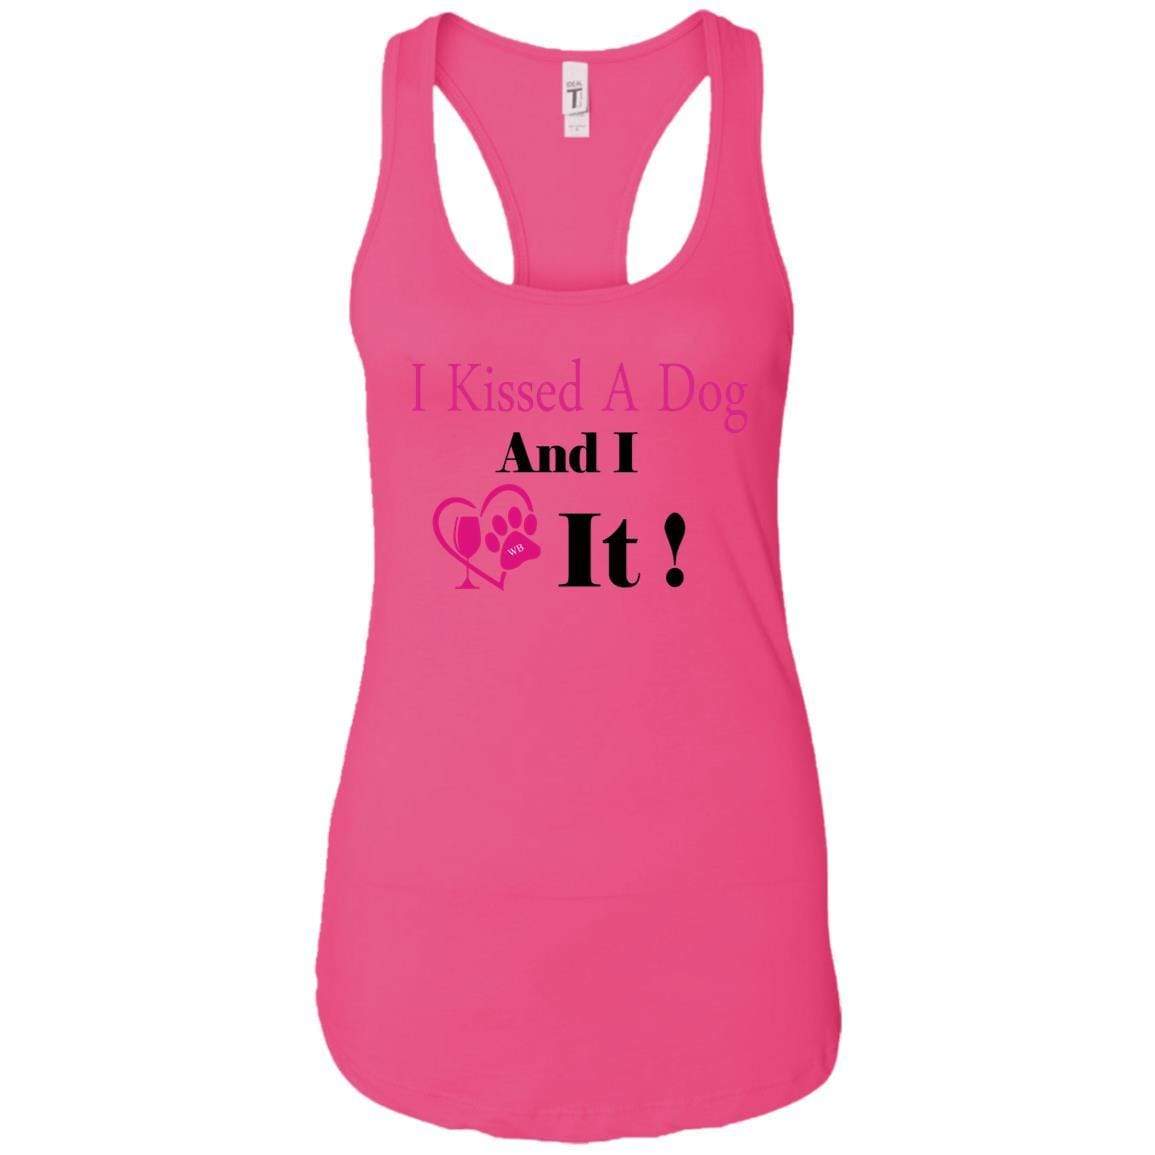 Tank Top Raspberry / X-Small WineyBitches.co "I Kissed A Dog And I Loved It:" Ladies Ideal Racerback Tank WineyBitchesCo